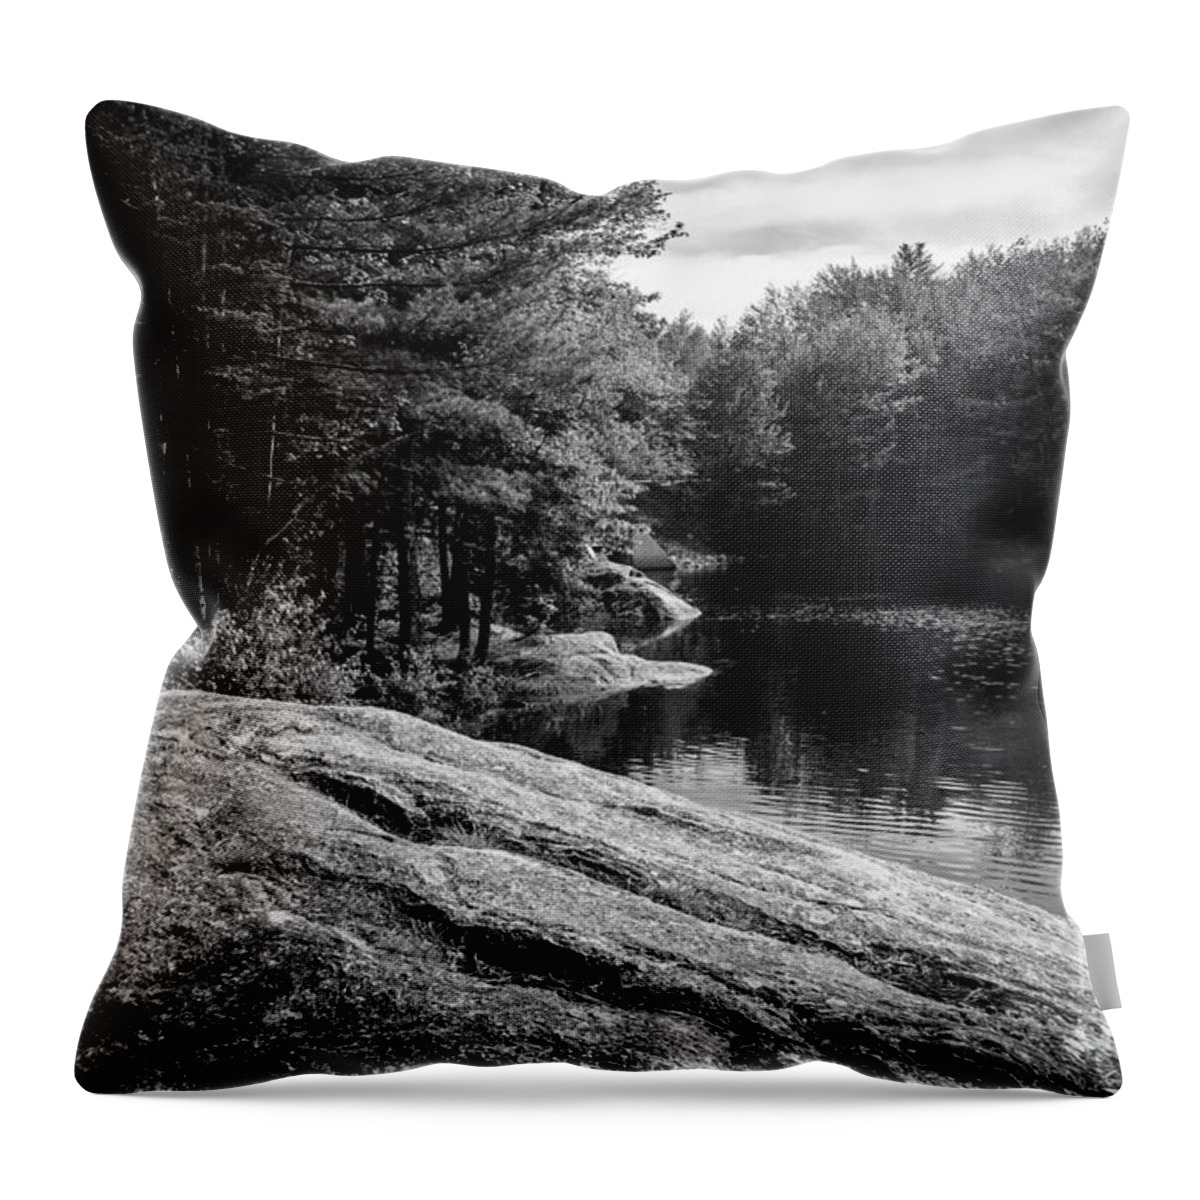 2013 Throw Pillow featuring the photograph Pondside by Mark Myhaver